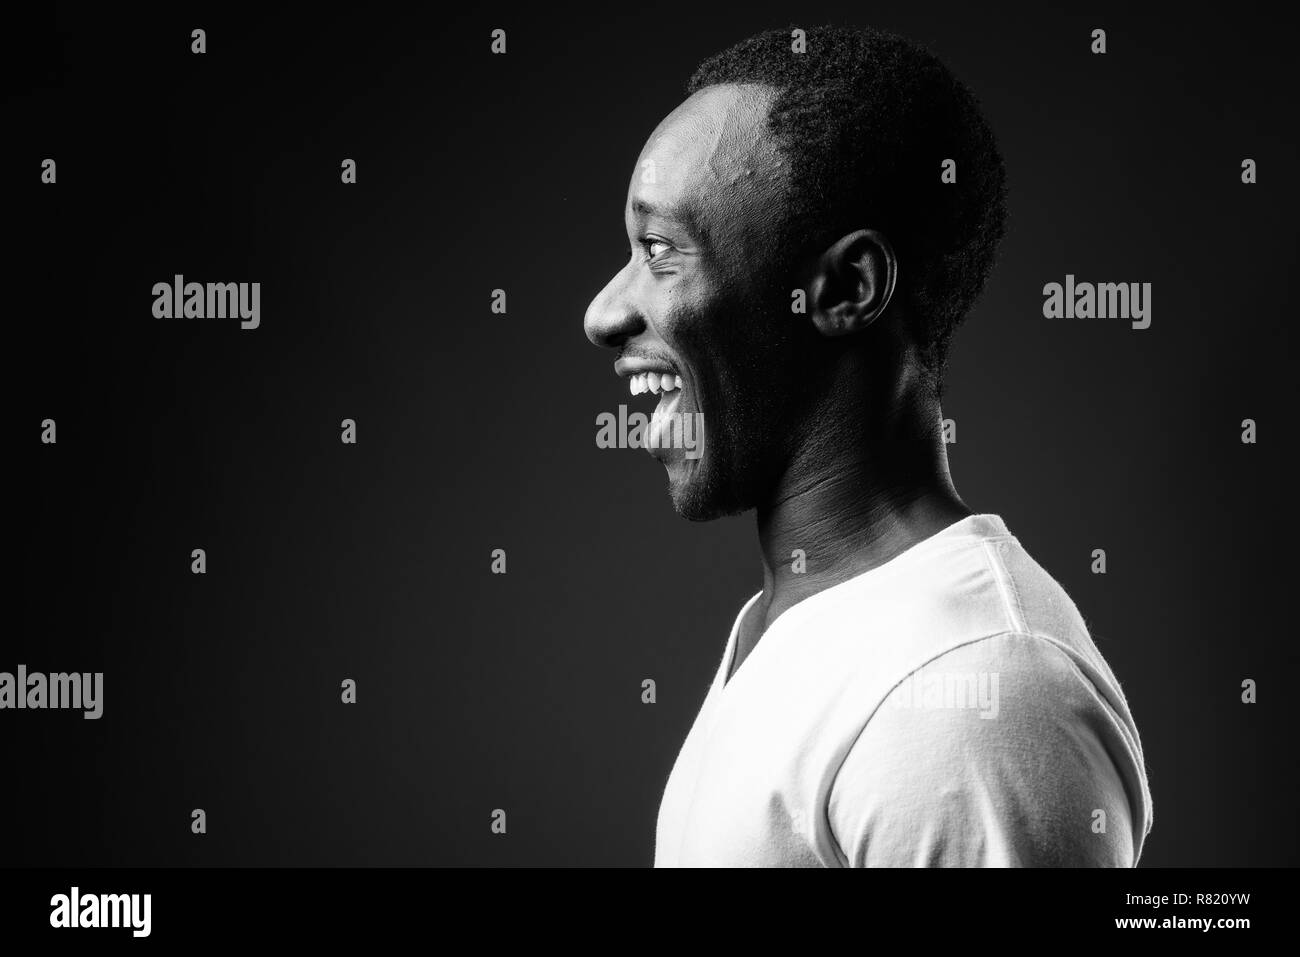 Profile view portrait of young African man smiling in black and white Stock Photo